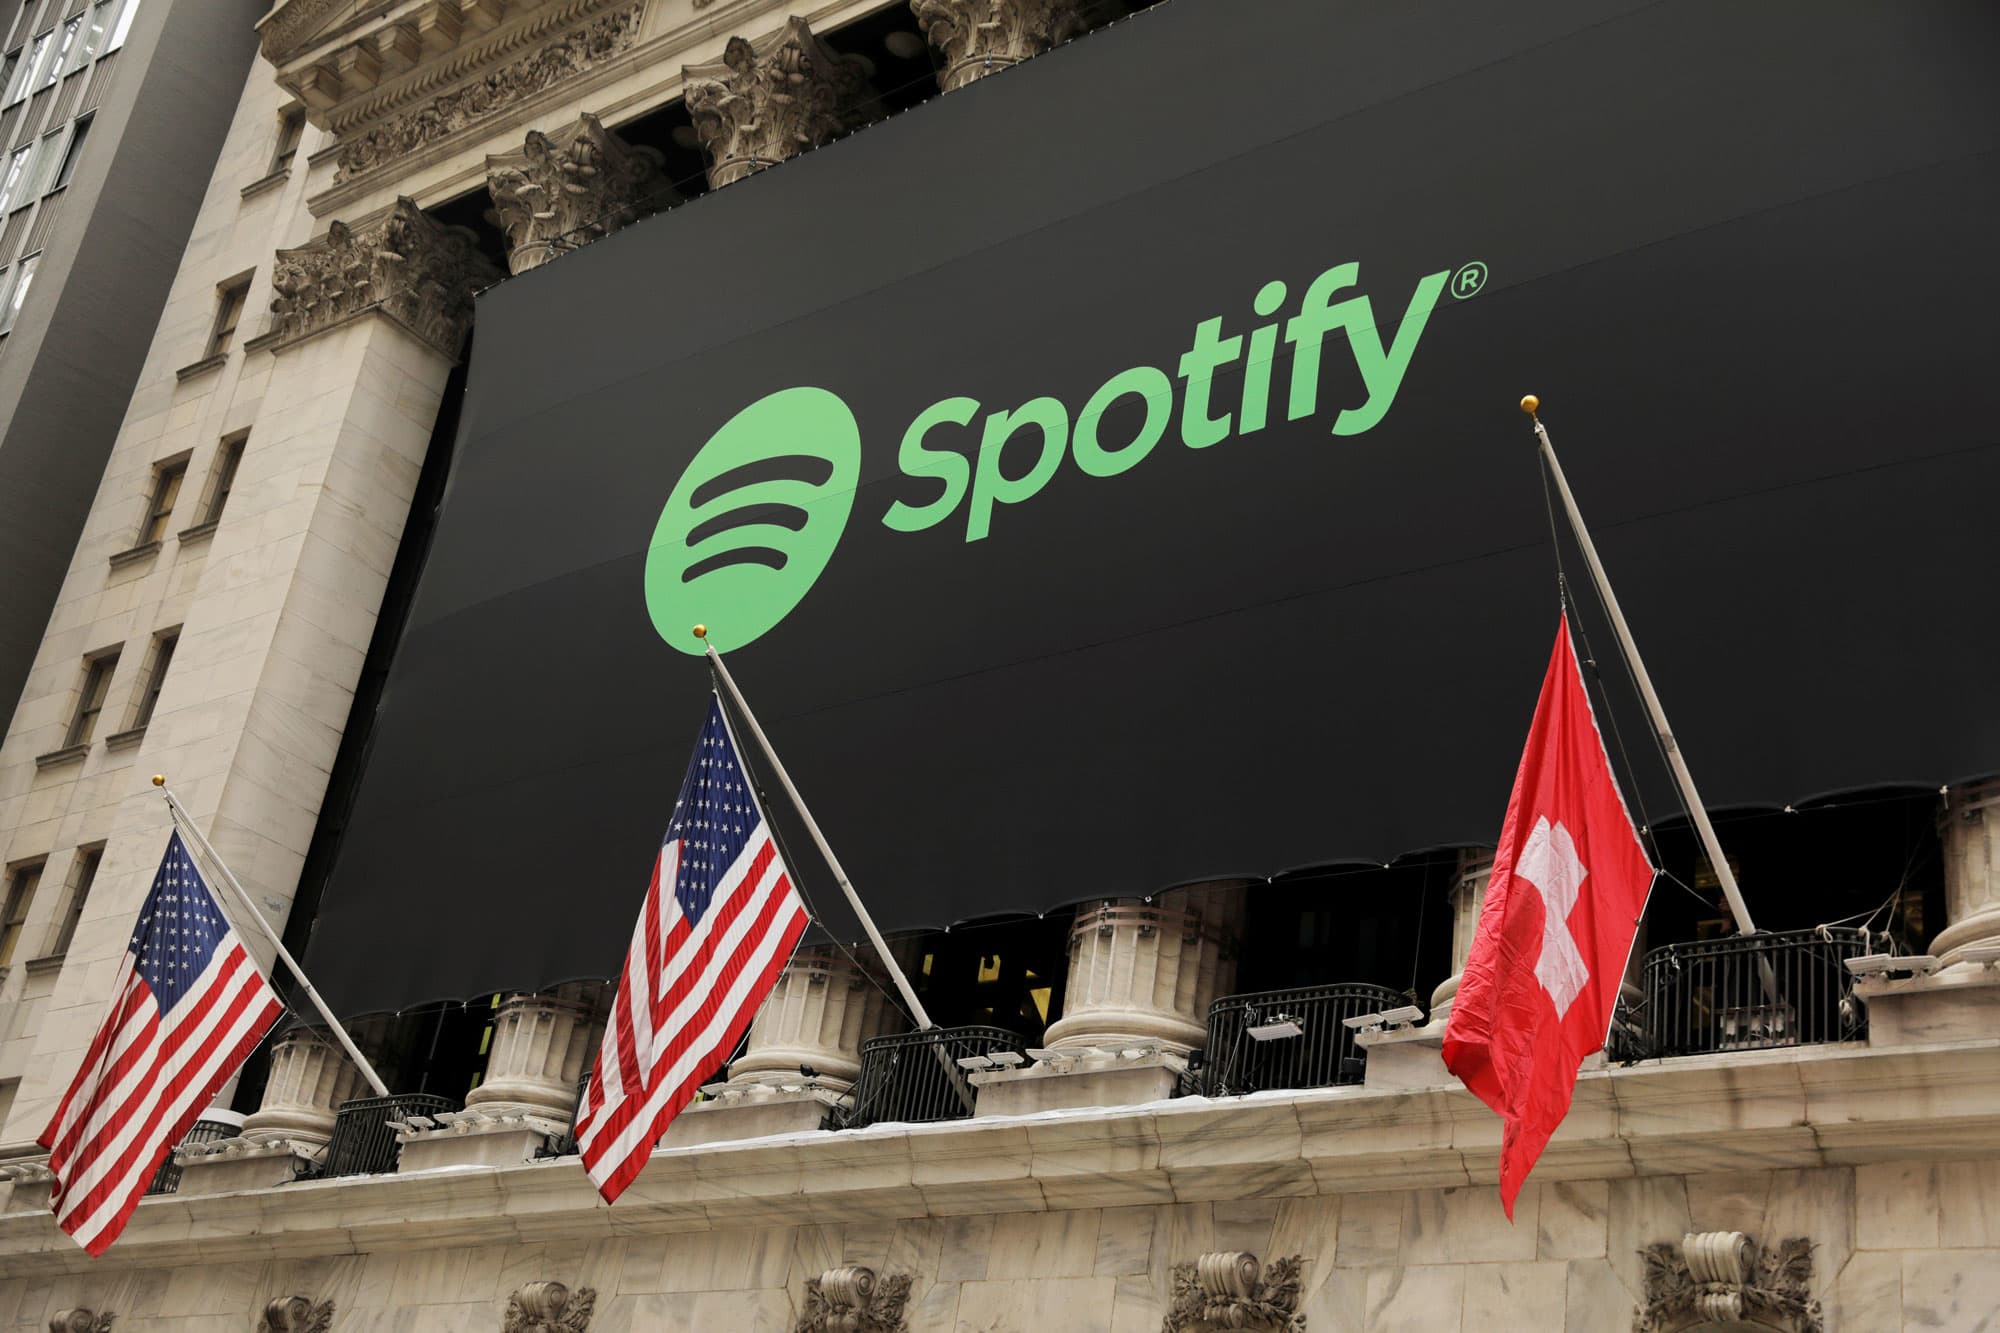 Buy Spotify shares after the music streaming giant's post-earnings drop, Deutsche Bank says